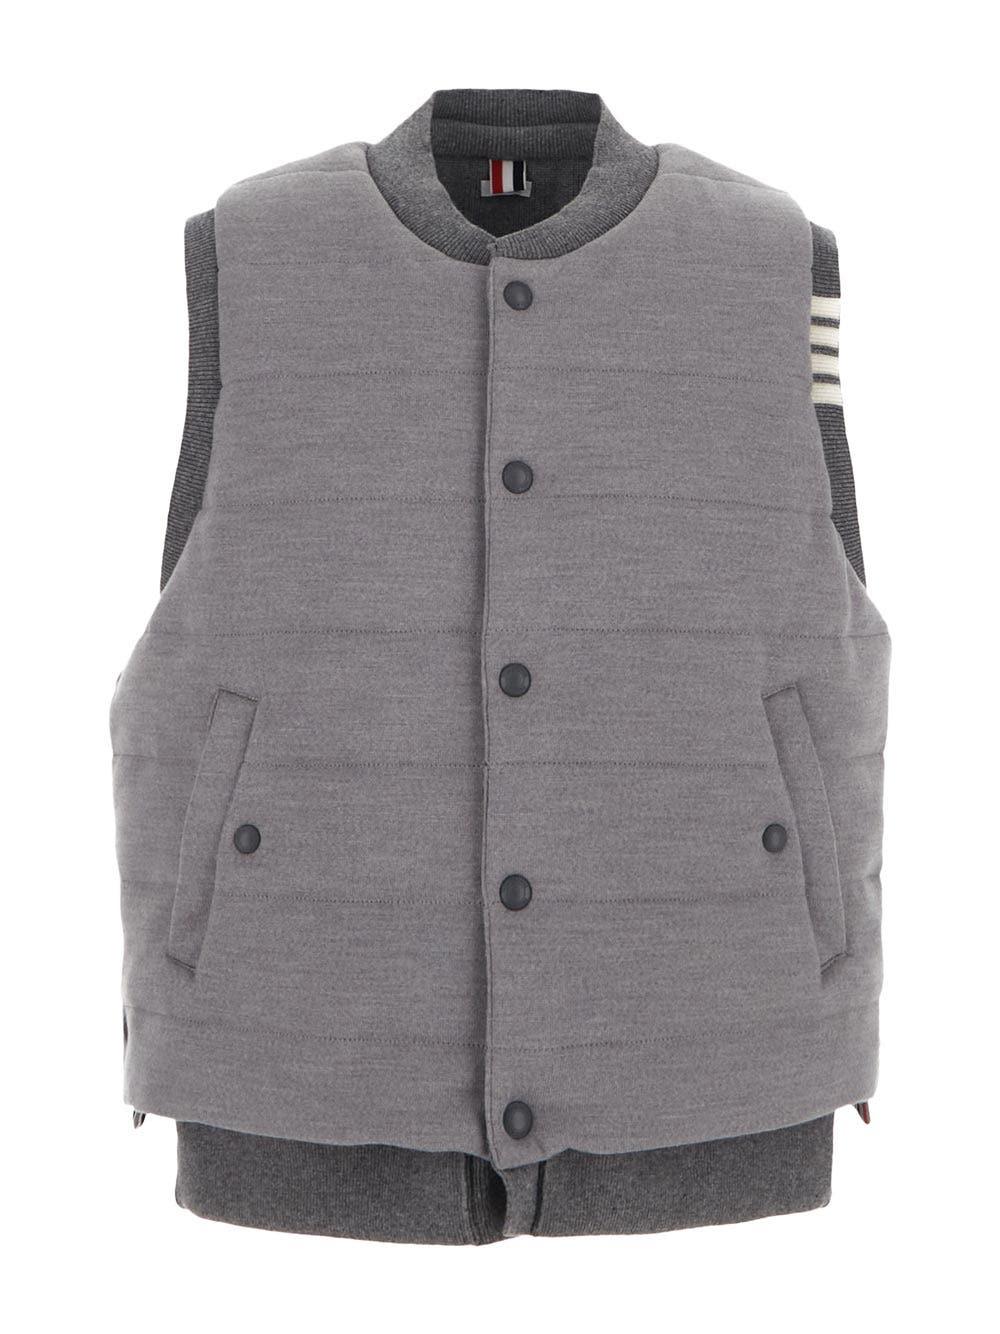 Thom Browne Reversible Downfill Vest in Gray for Men | Lyst